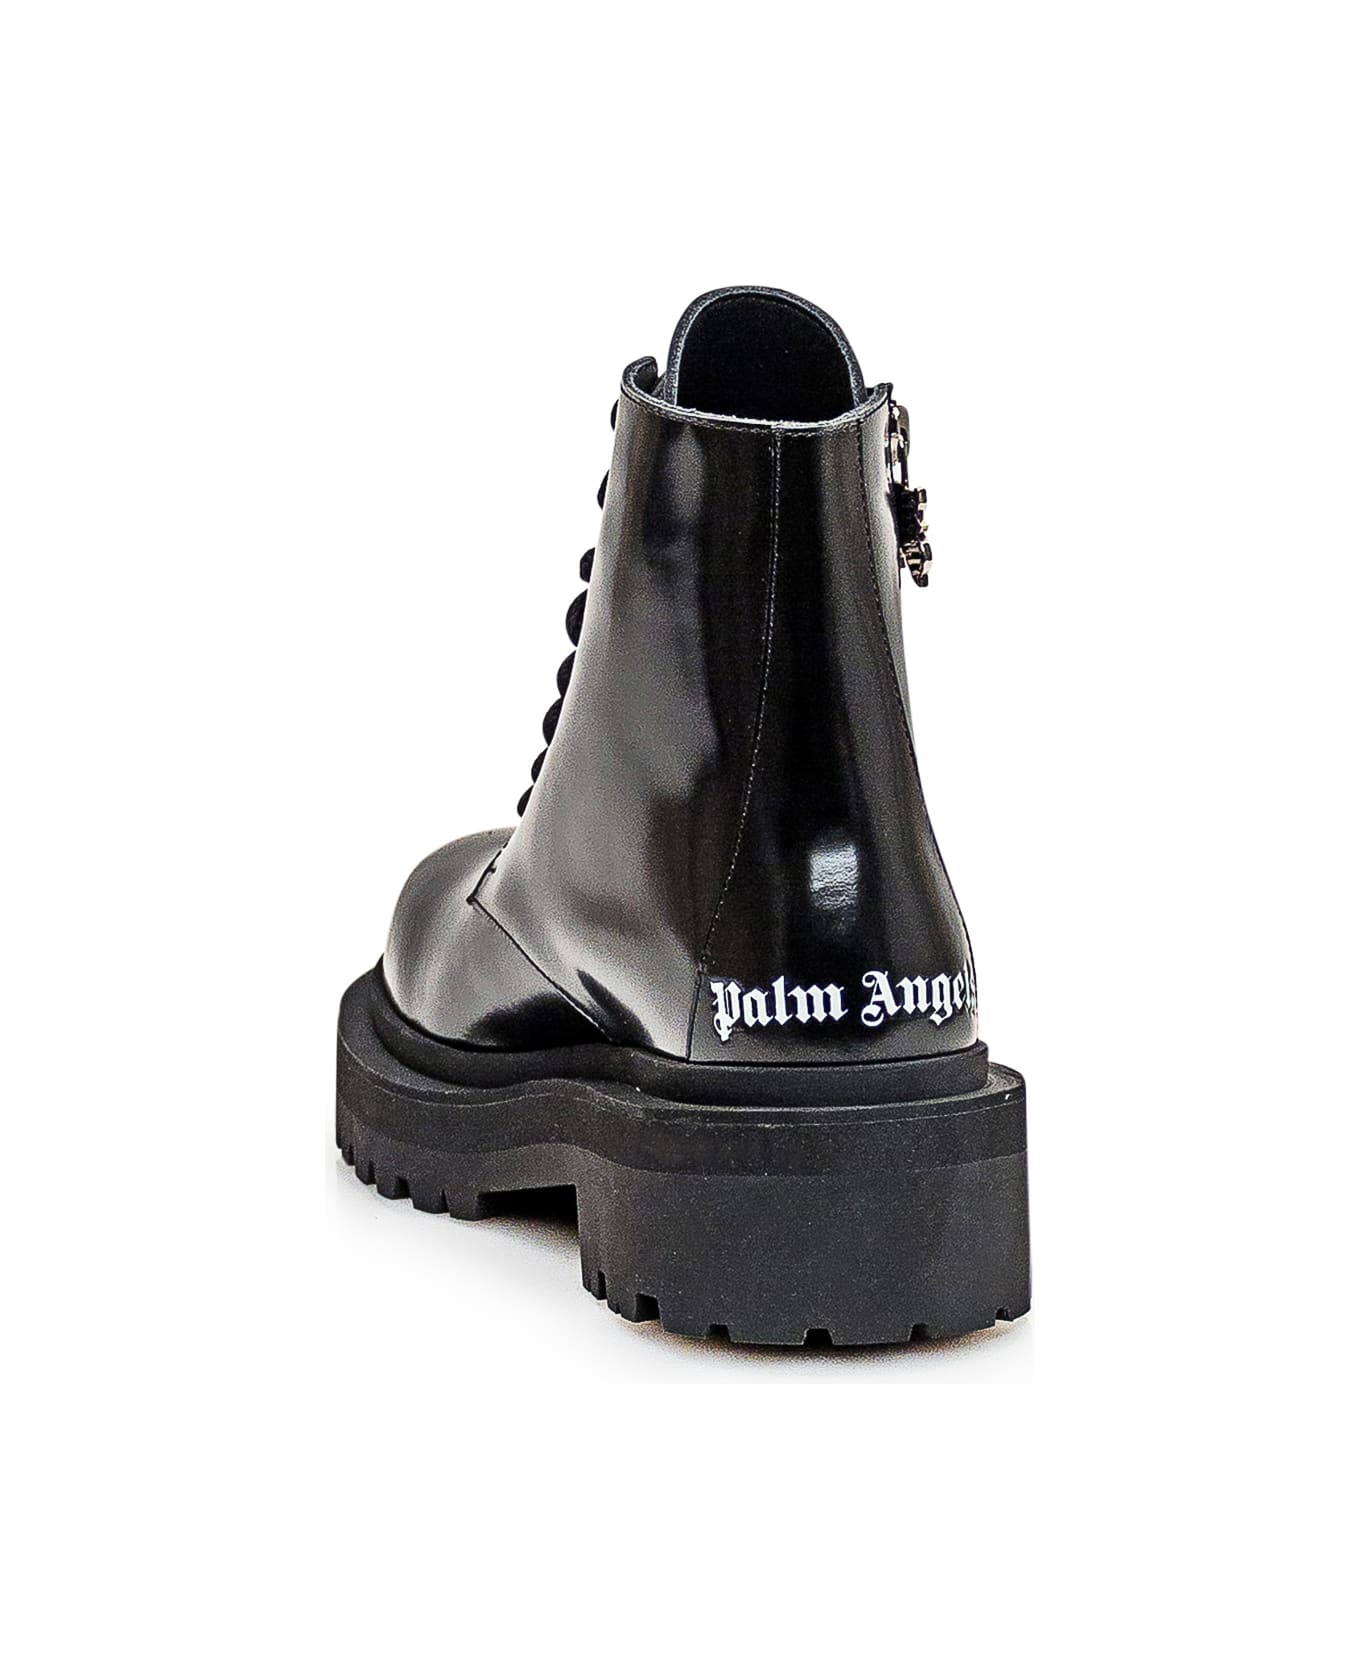 Palm Angels Combat Boots In Black Leather - Black ブーツ